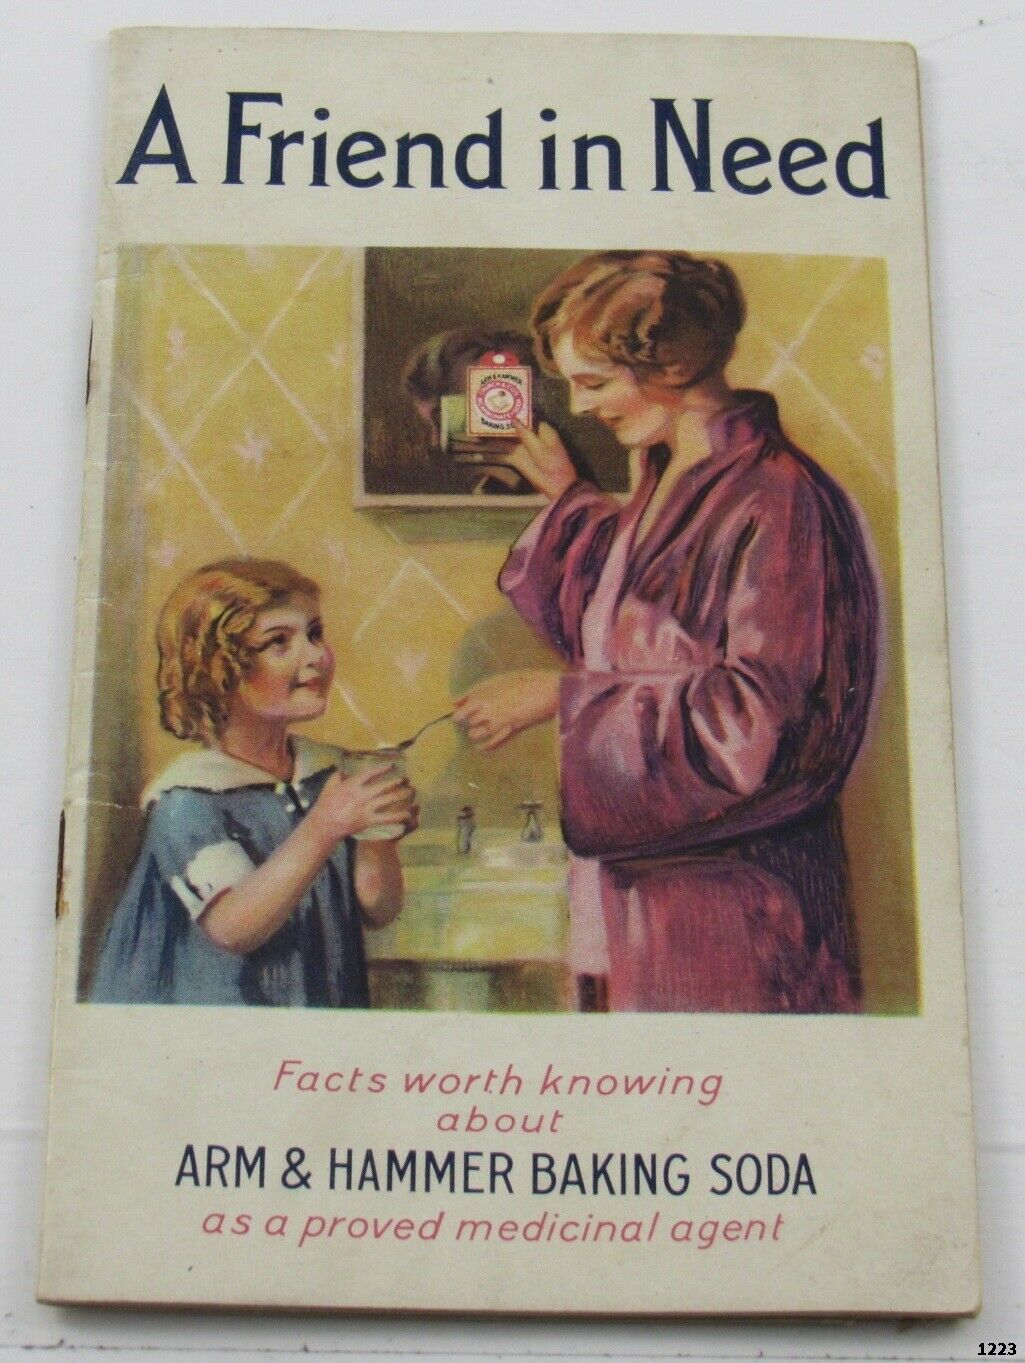 1933 Arm & Hammer Baking Soda : A Friend In Need : Advertising Booklet